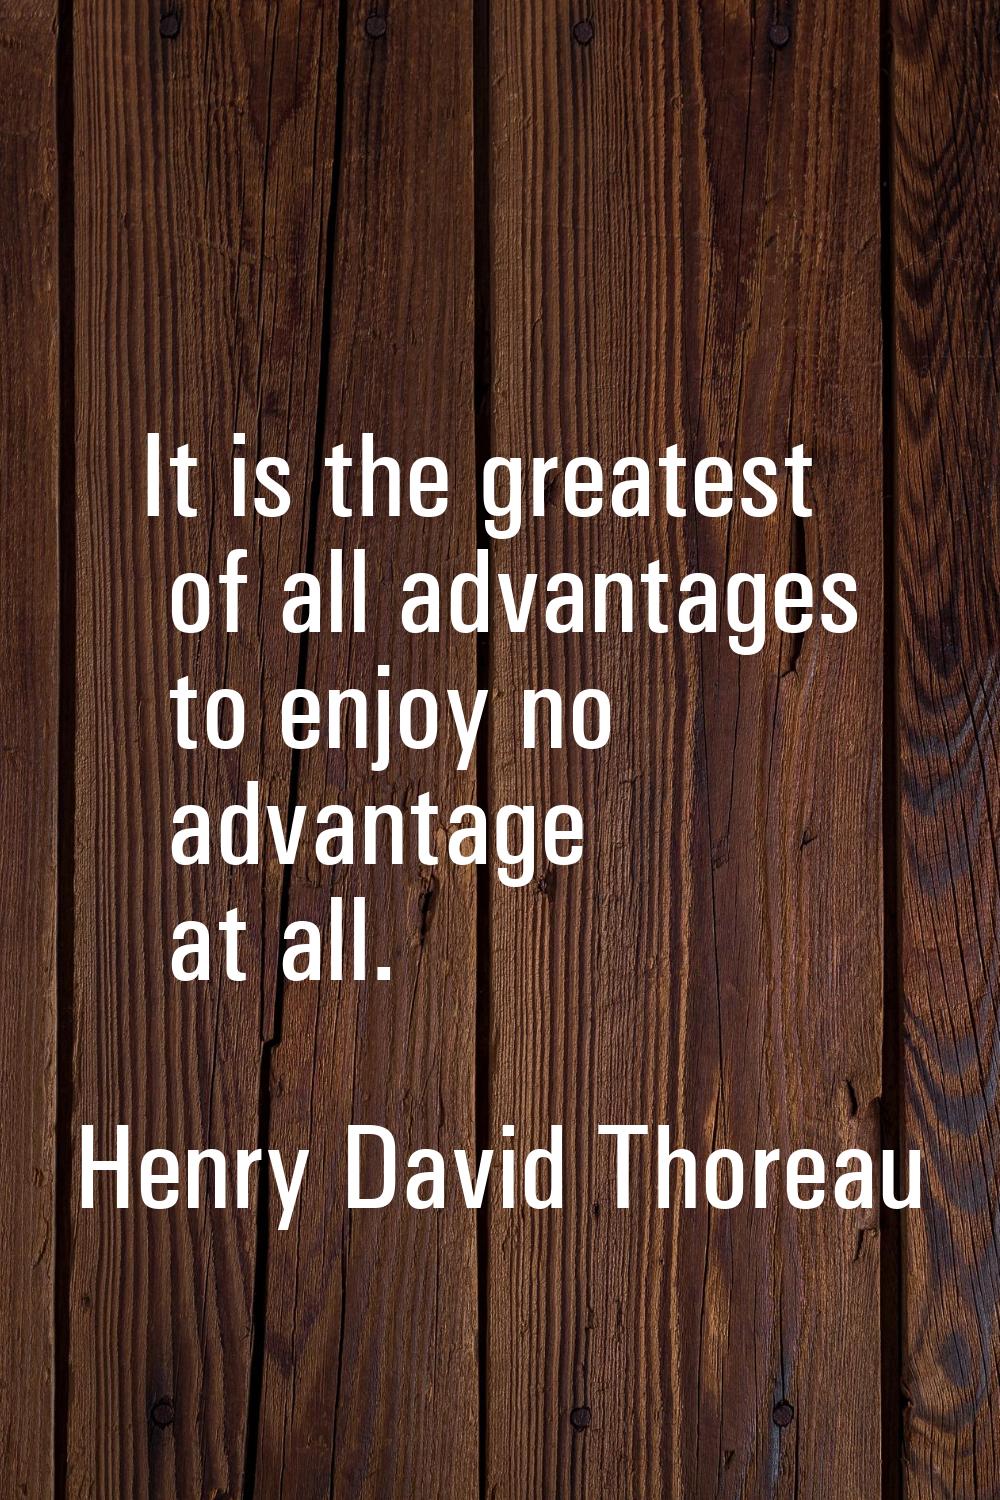 It is the greatest of all advantages to enjoy no advantage at all.